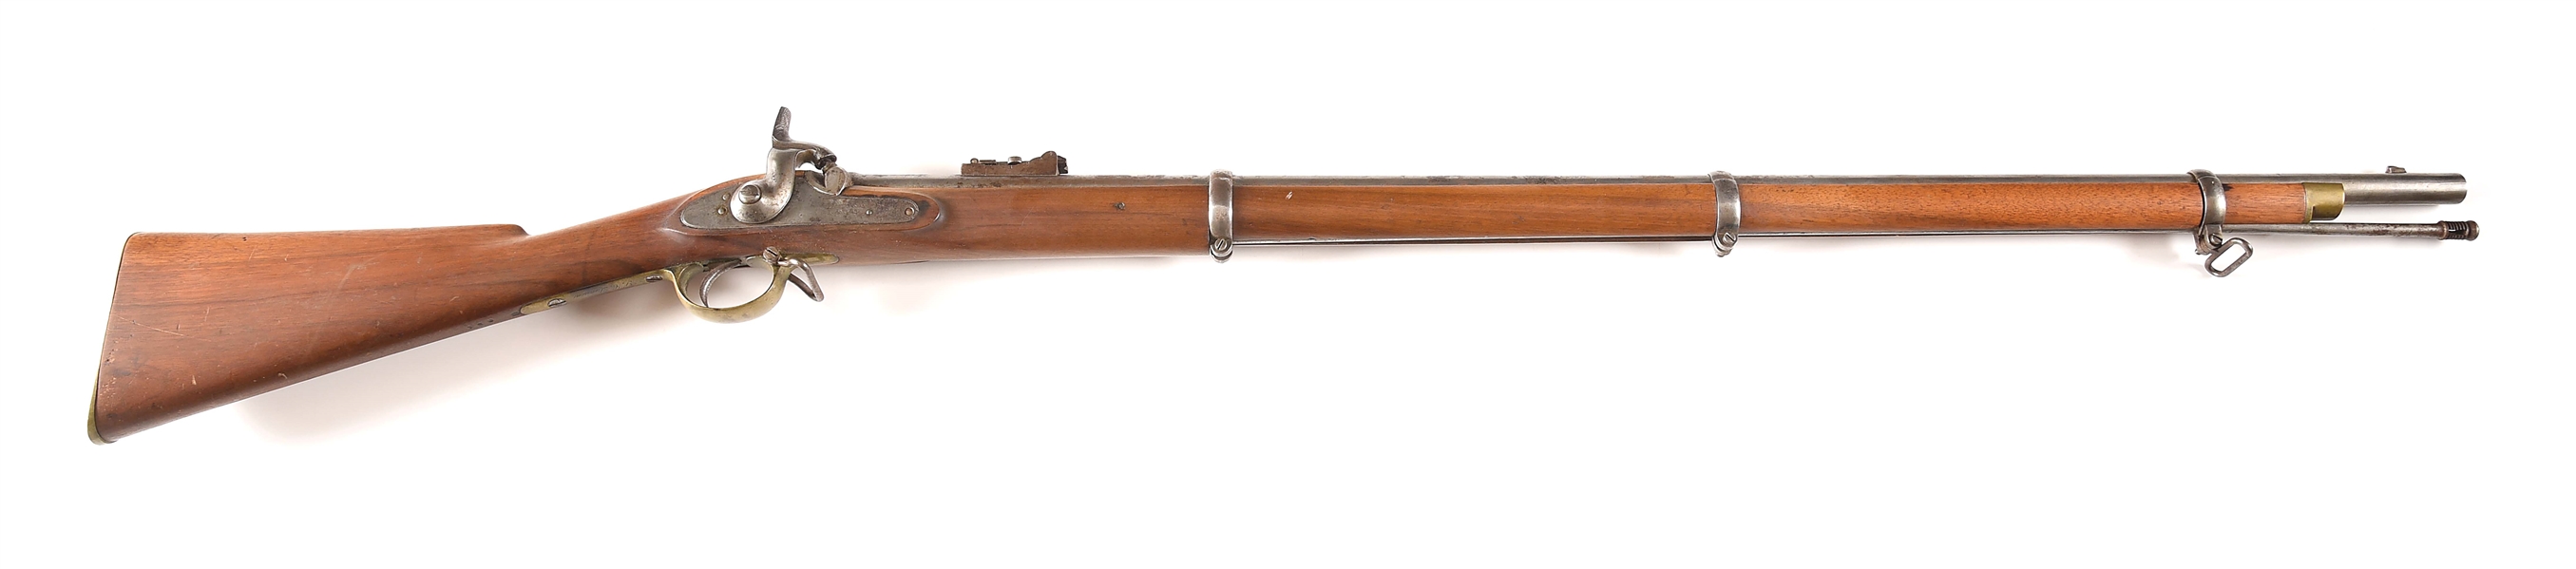 (A) ENFIELD PERCUSSION MUSKET MADE BY WILKINSON.